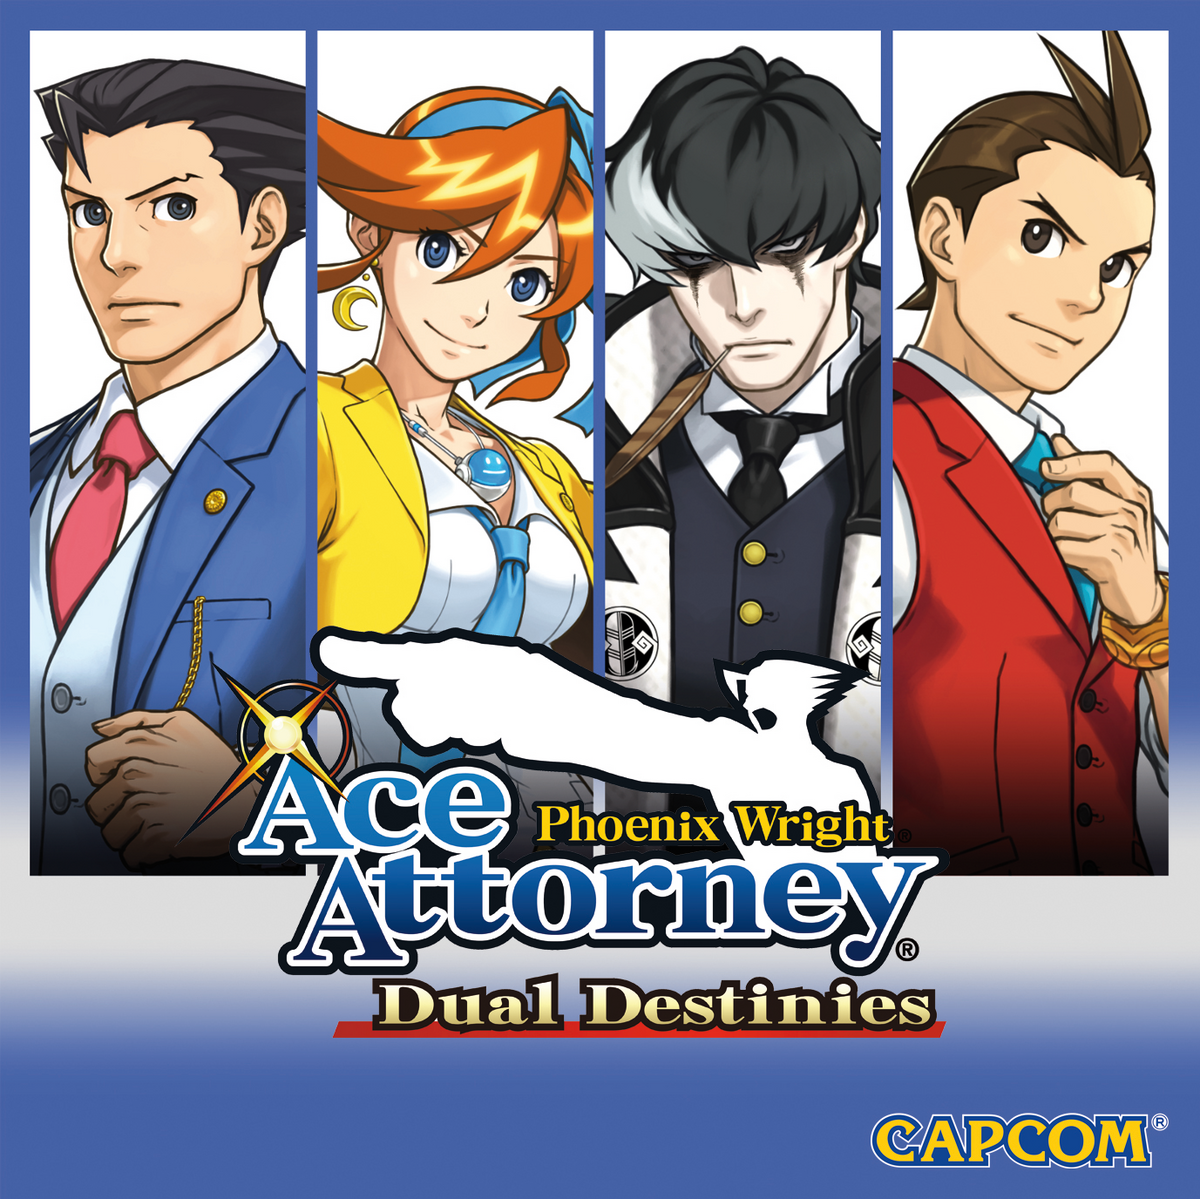 Ace Attorney Trilogy 3ds cover but in English. link to download the cover  in the comments (Big thanks to u/Little-Big-Smoke for his assistance in  creating the cover) : r/AceAttorney